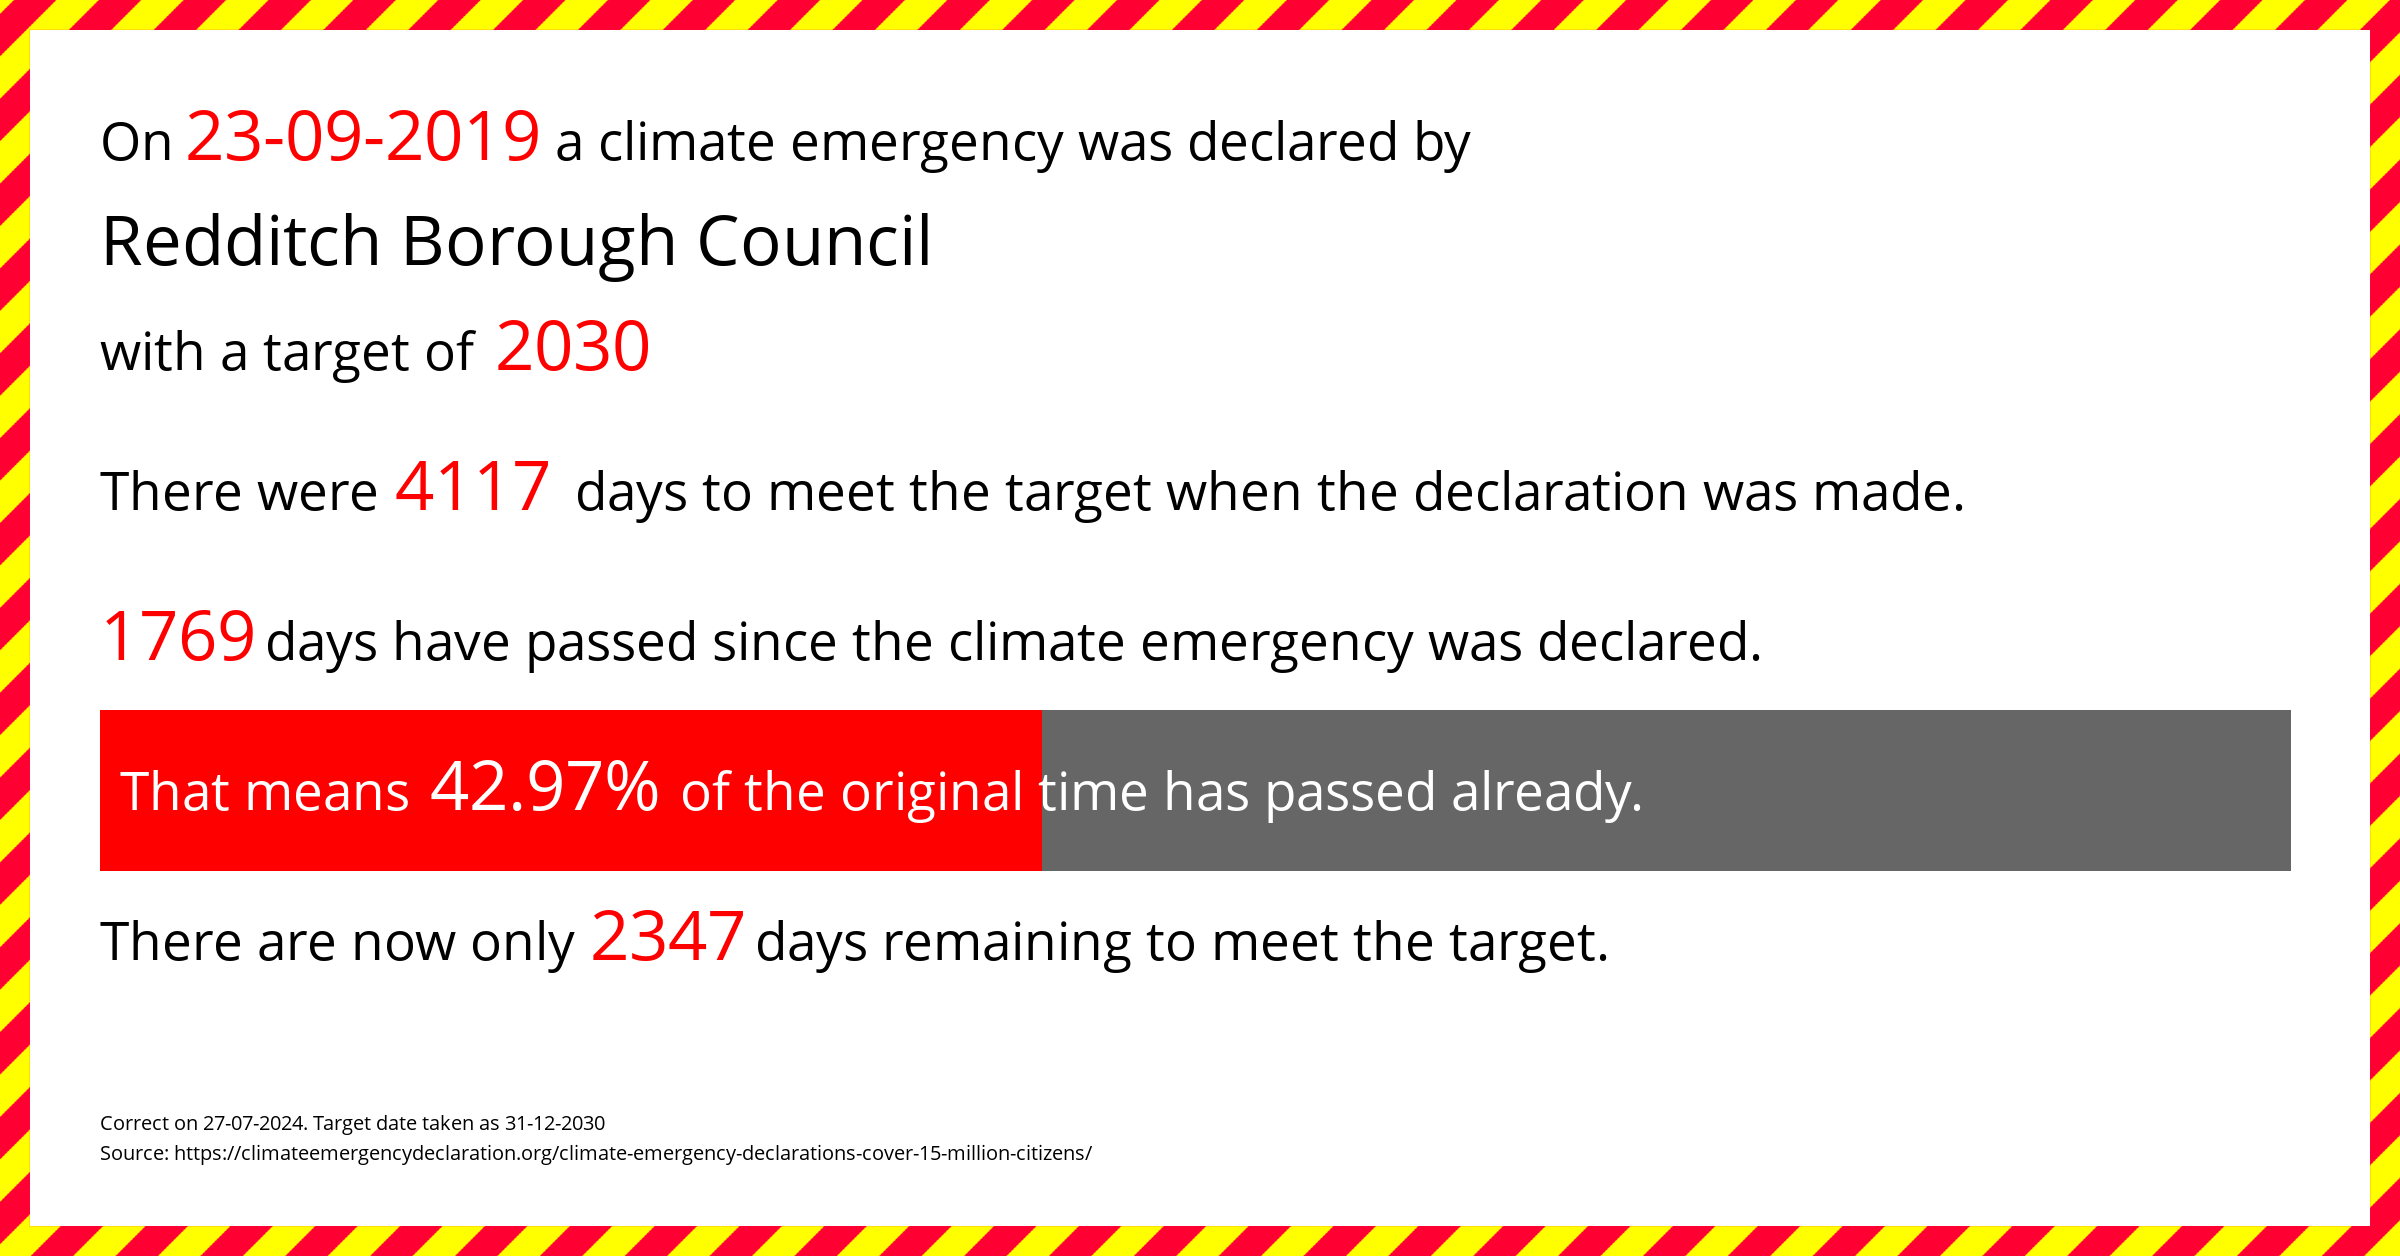 Redditch Borough Council declared a Climate emergency on Monday 23rd September 2019, with a target of 2030.